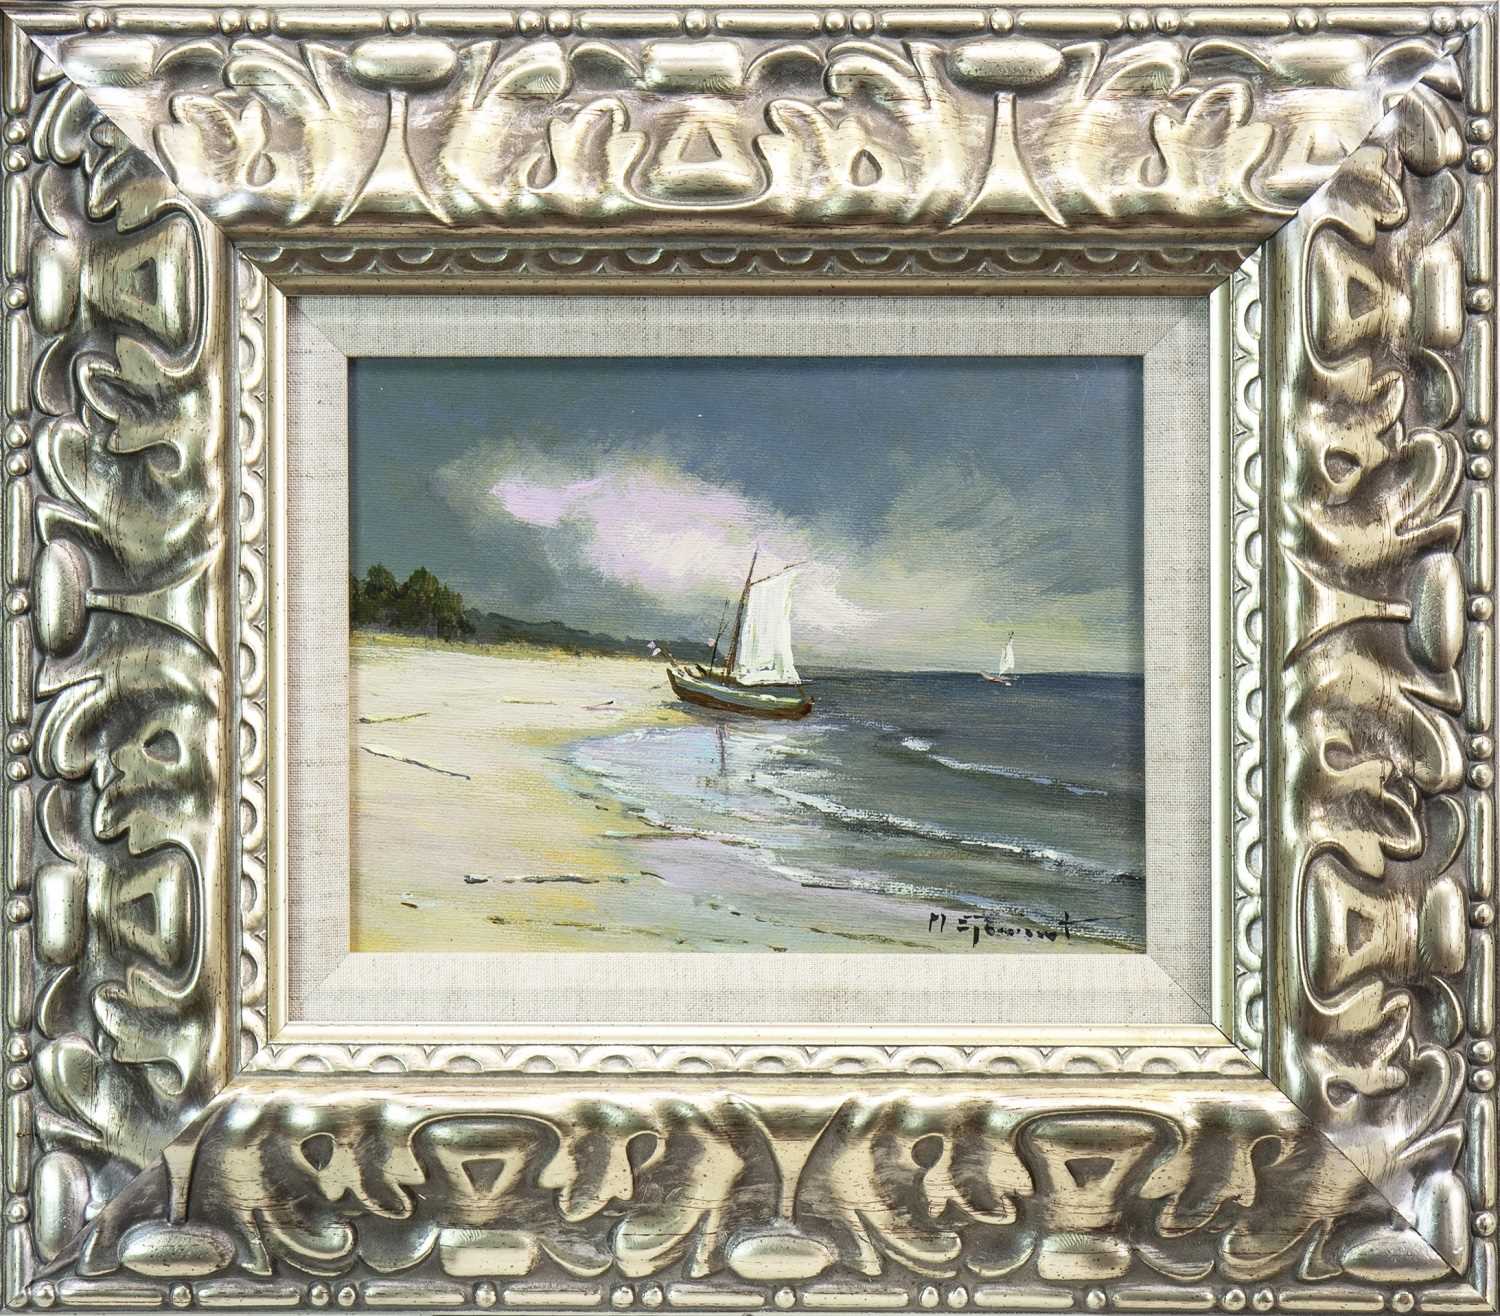 Lot 488 - SAILBOATS BY THE SHORE, AN OIL